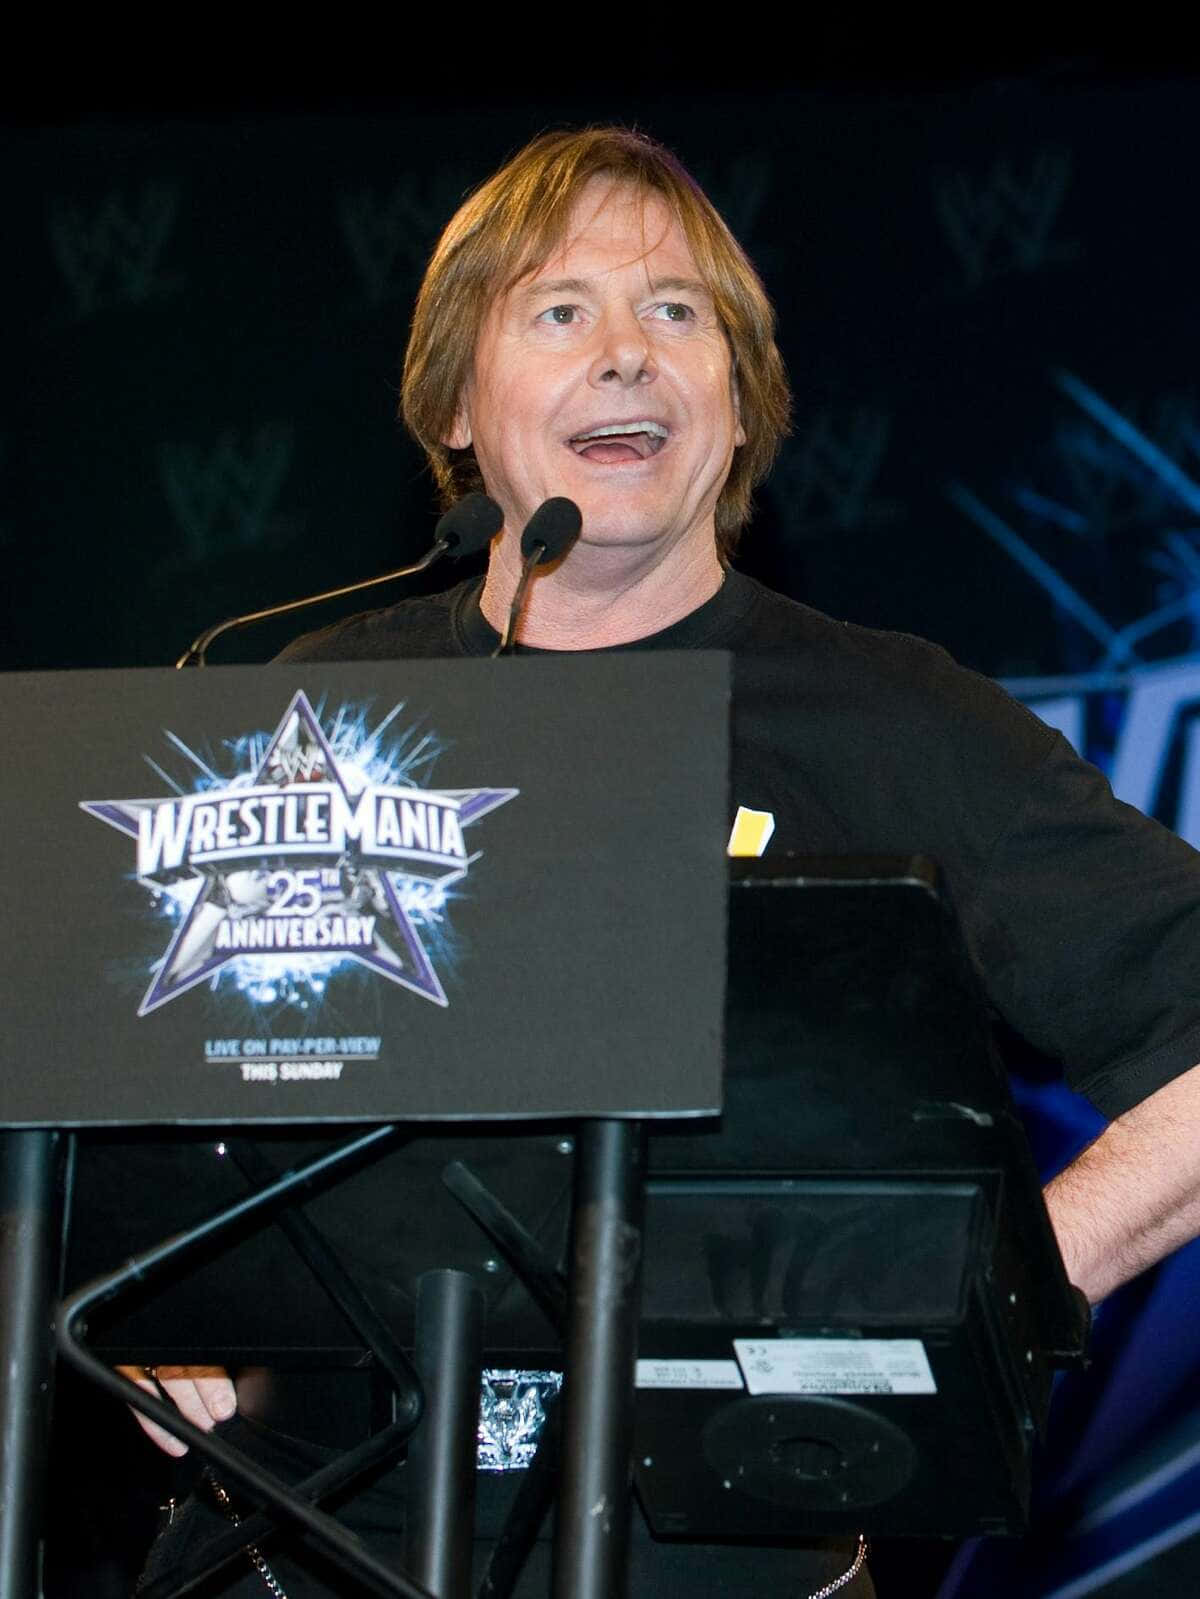 Roddy Piper During The Wrestle Mania 25th Anniversary Wallpaper